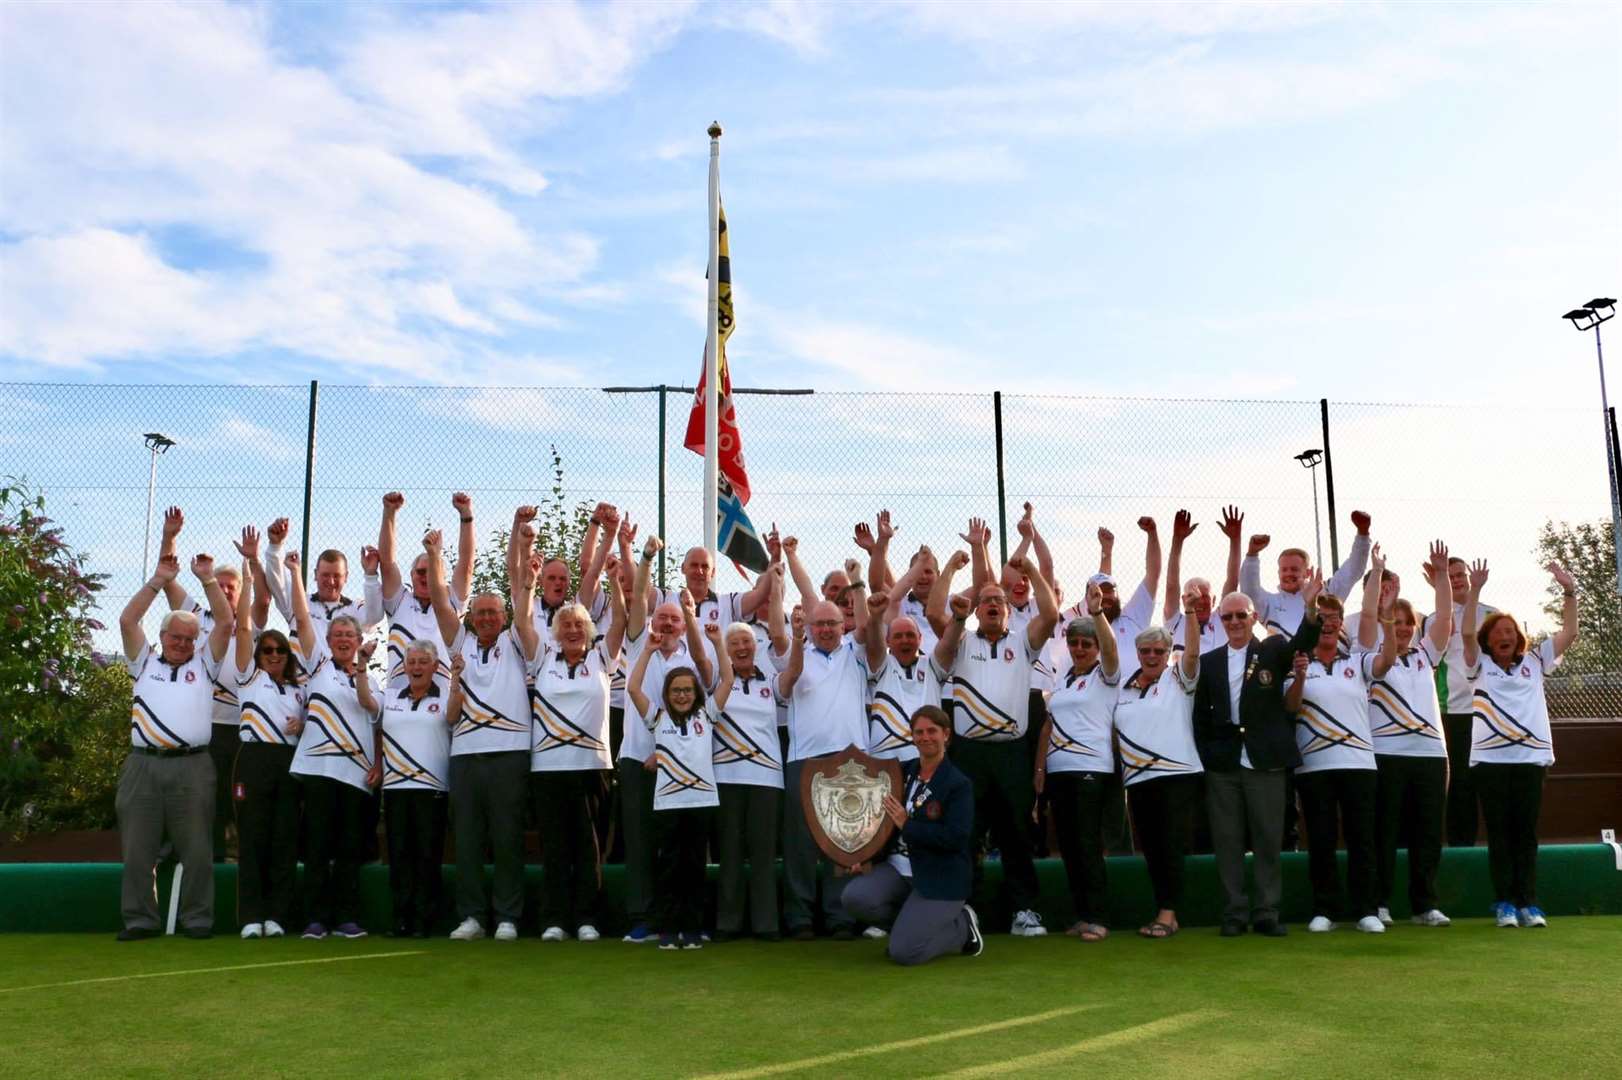 Members of Thurso Bowling Club celebrating their 2019 success in the Munro Shield, the Caithness county club league.